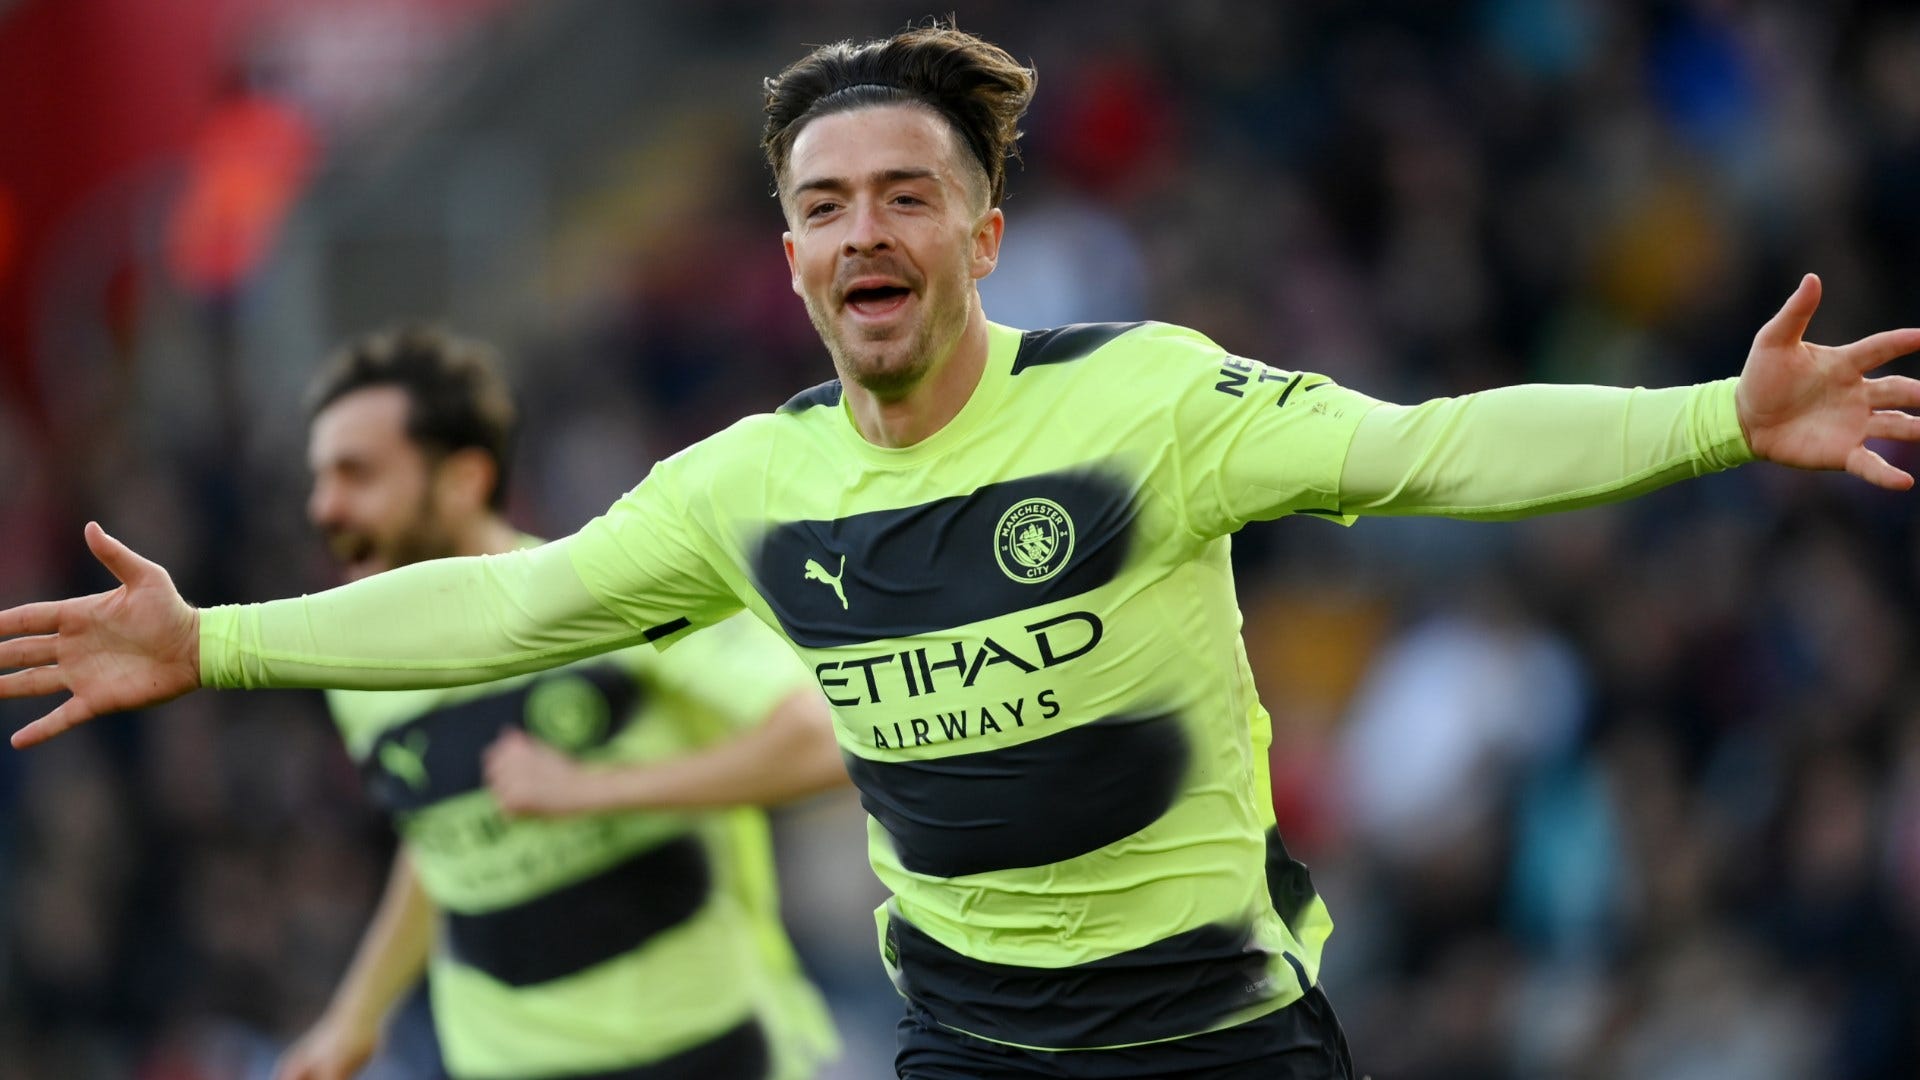 Who were the EFL's top assist makers in 2022/23? - The English